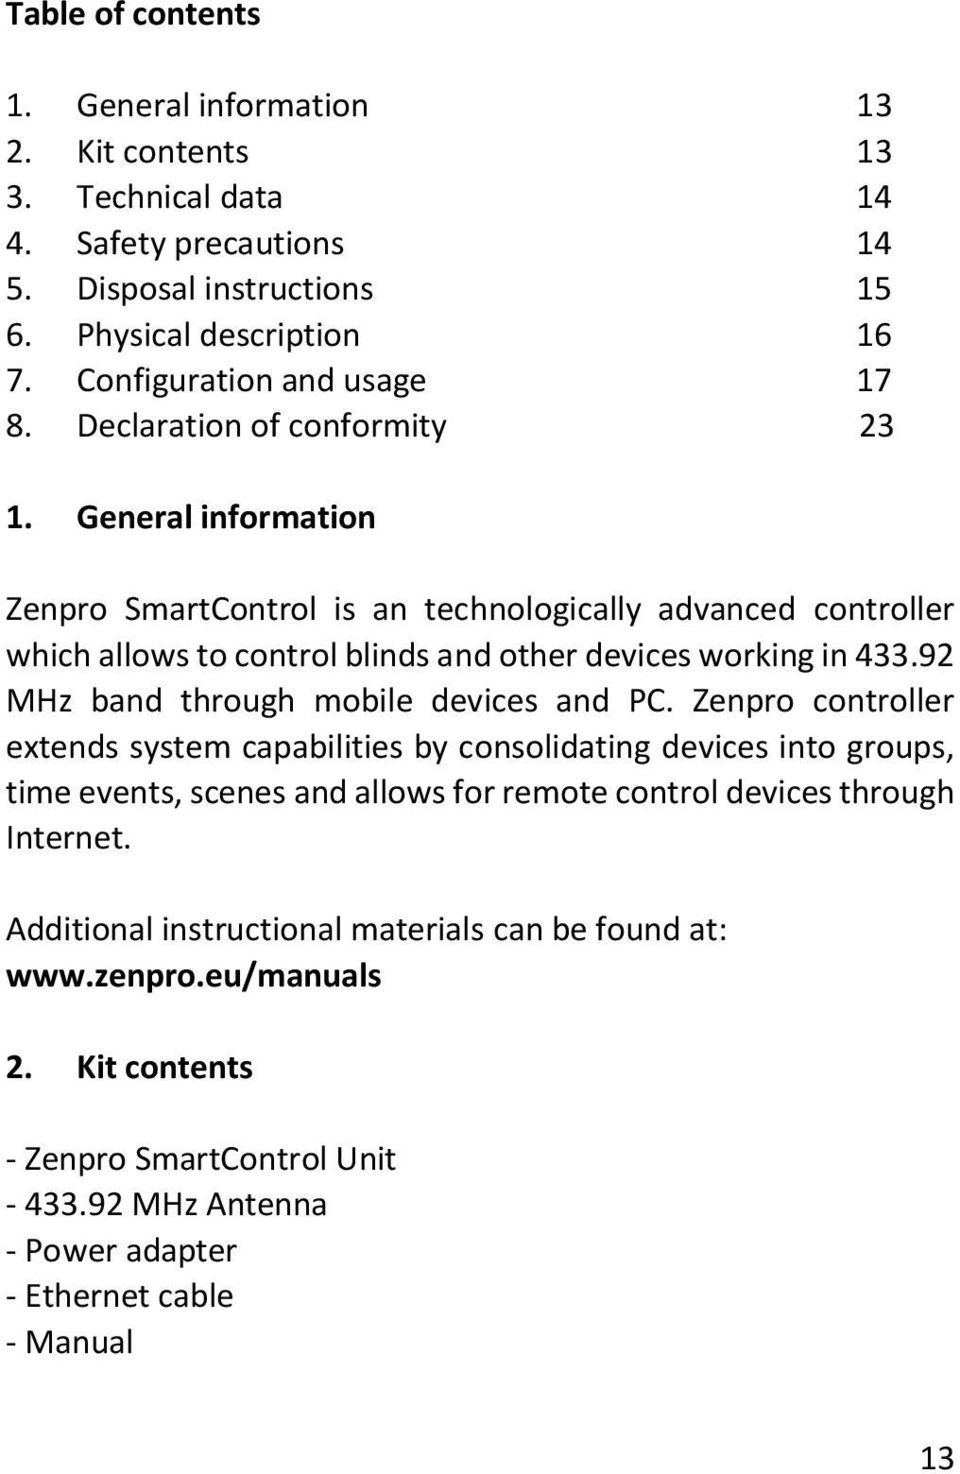 General information Zenpro SmartControl is an technologically advanced controller which allows to control blinds and other devices working in 433.92 MHz band through mobile devices and PC.